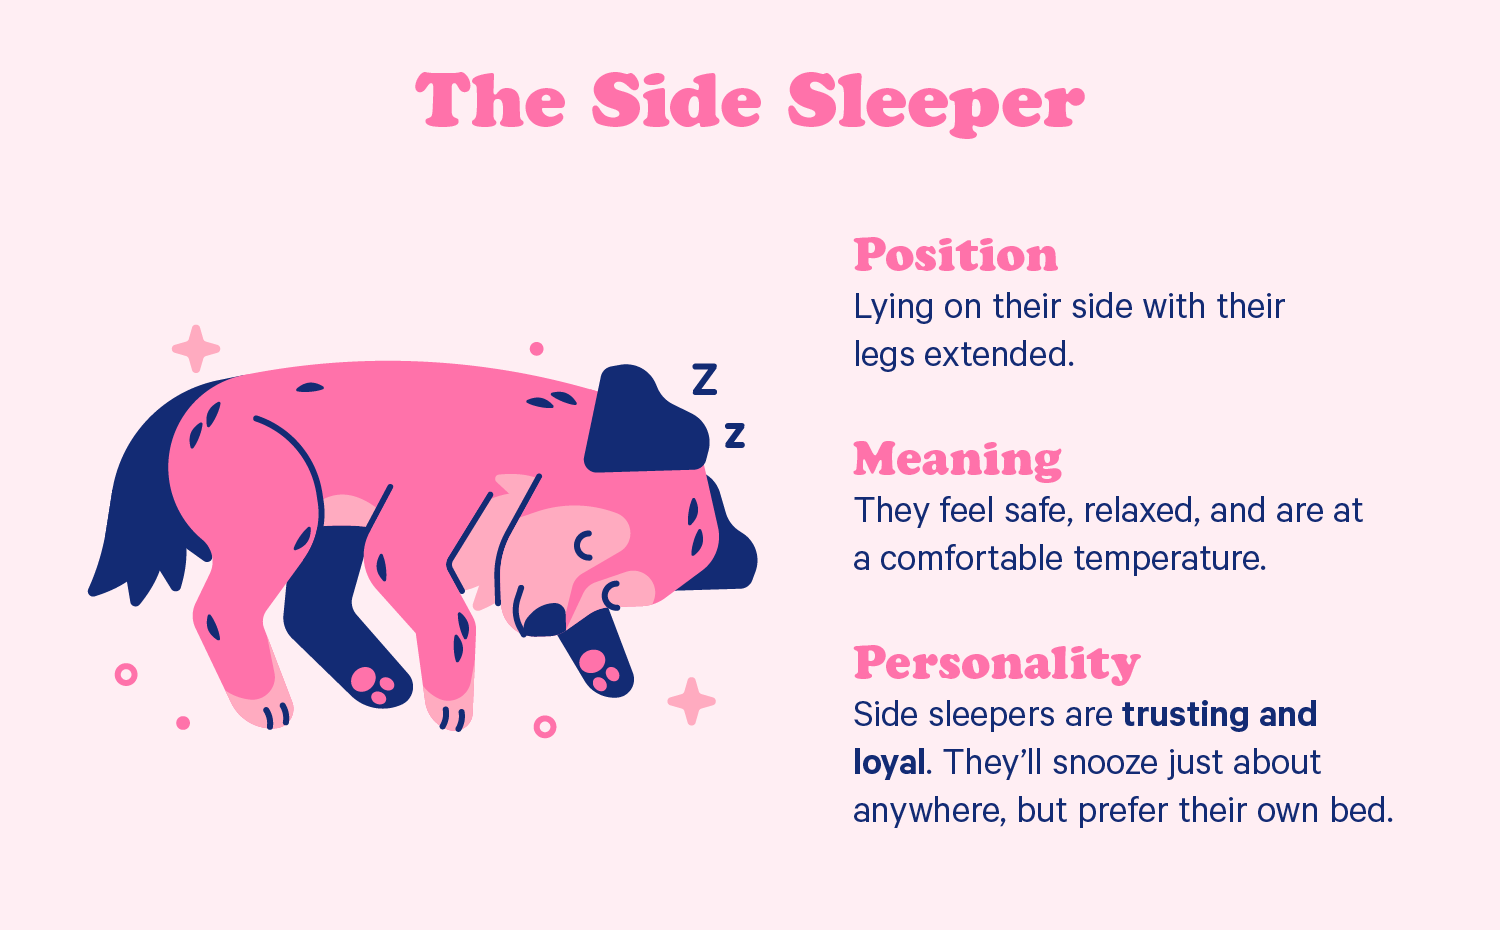 let sleeping dogs lie meaning